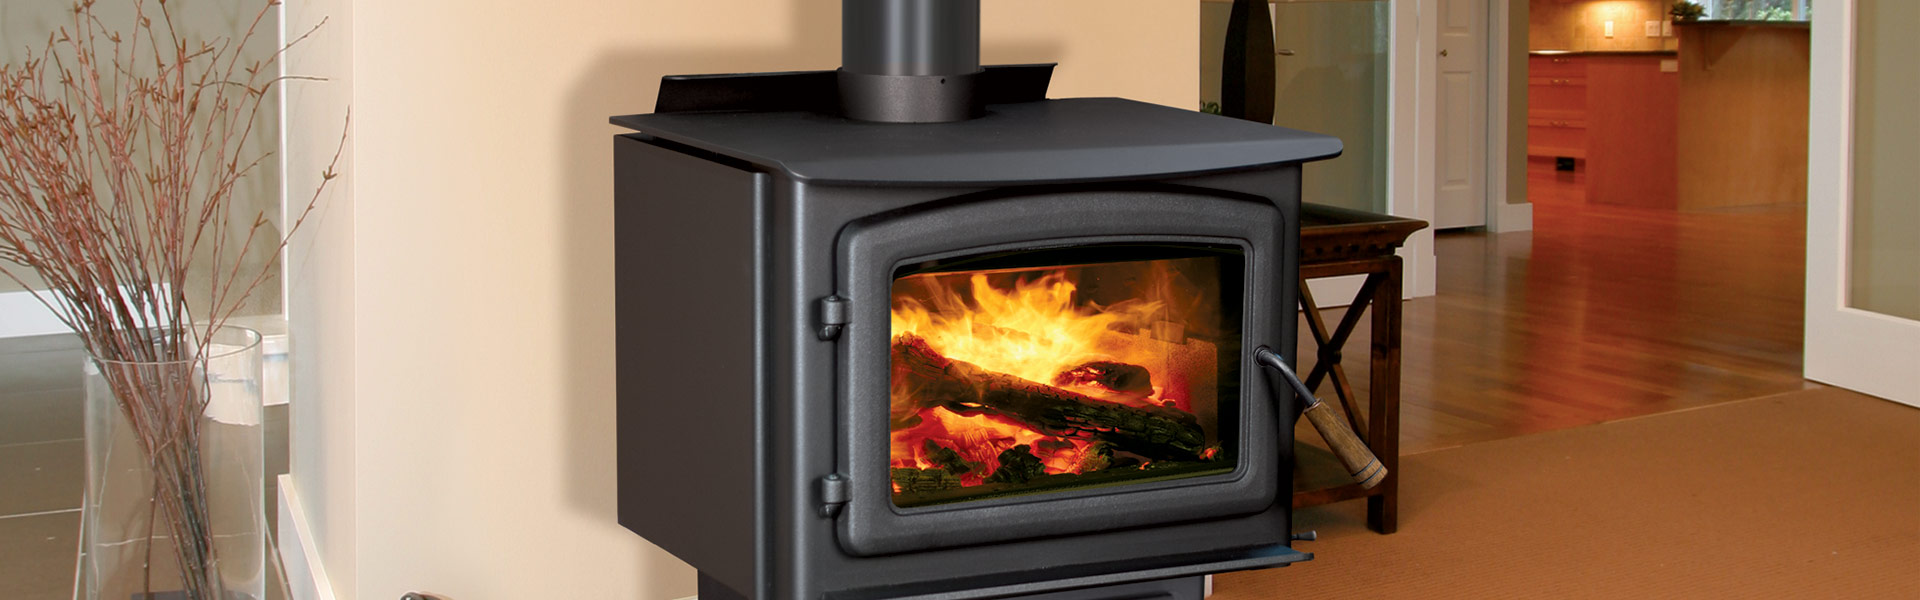 Guide To Buying a Wood Stove